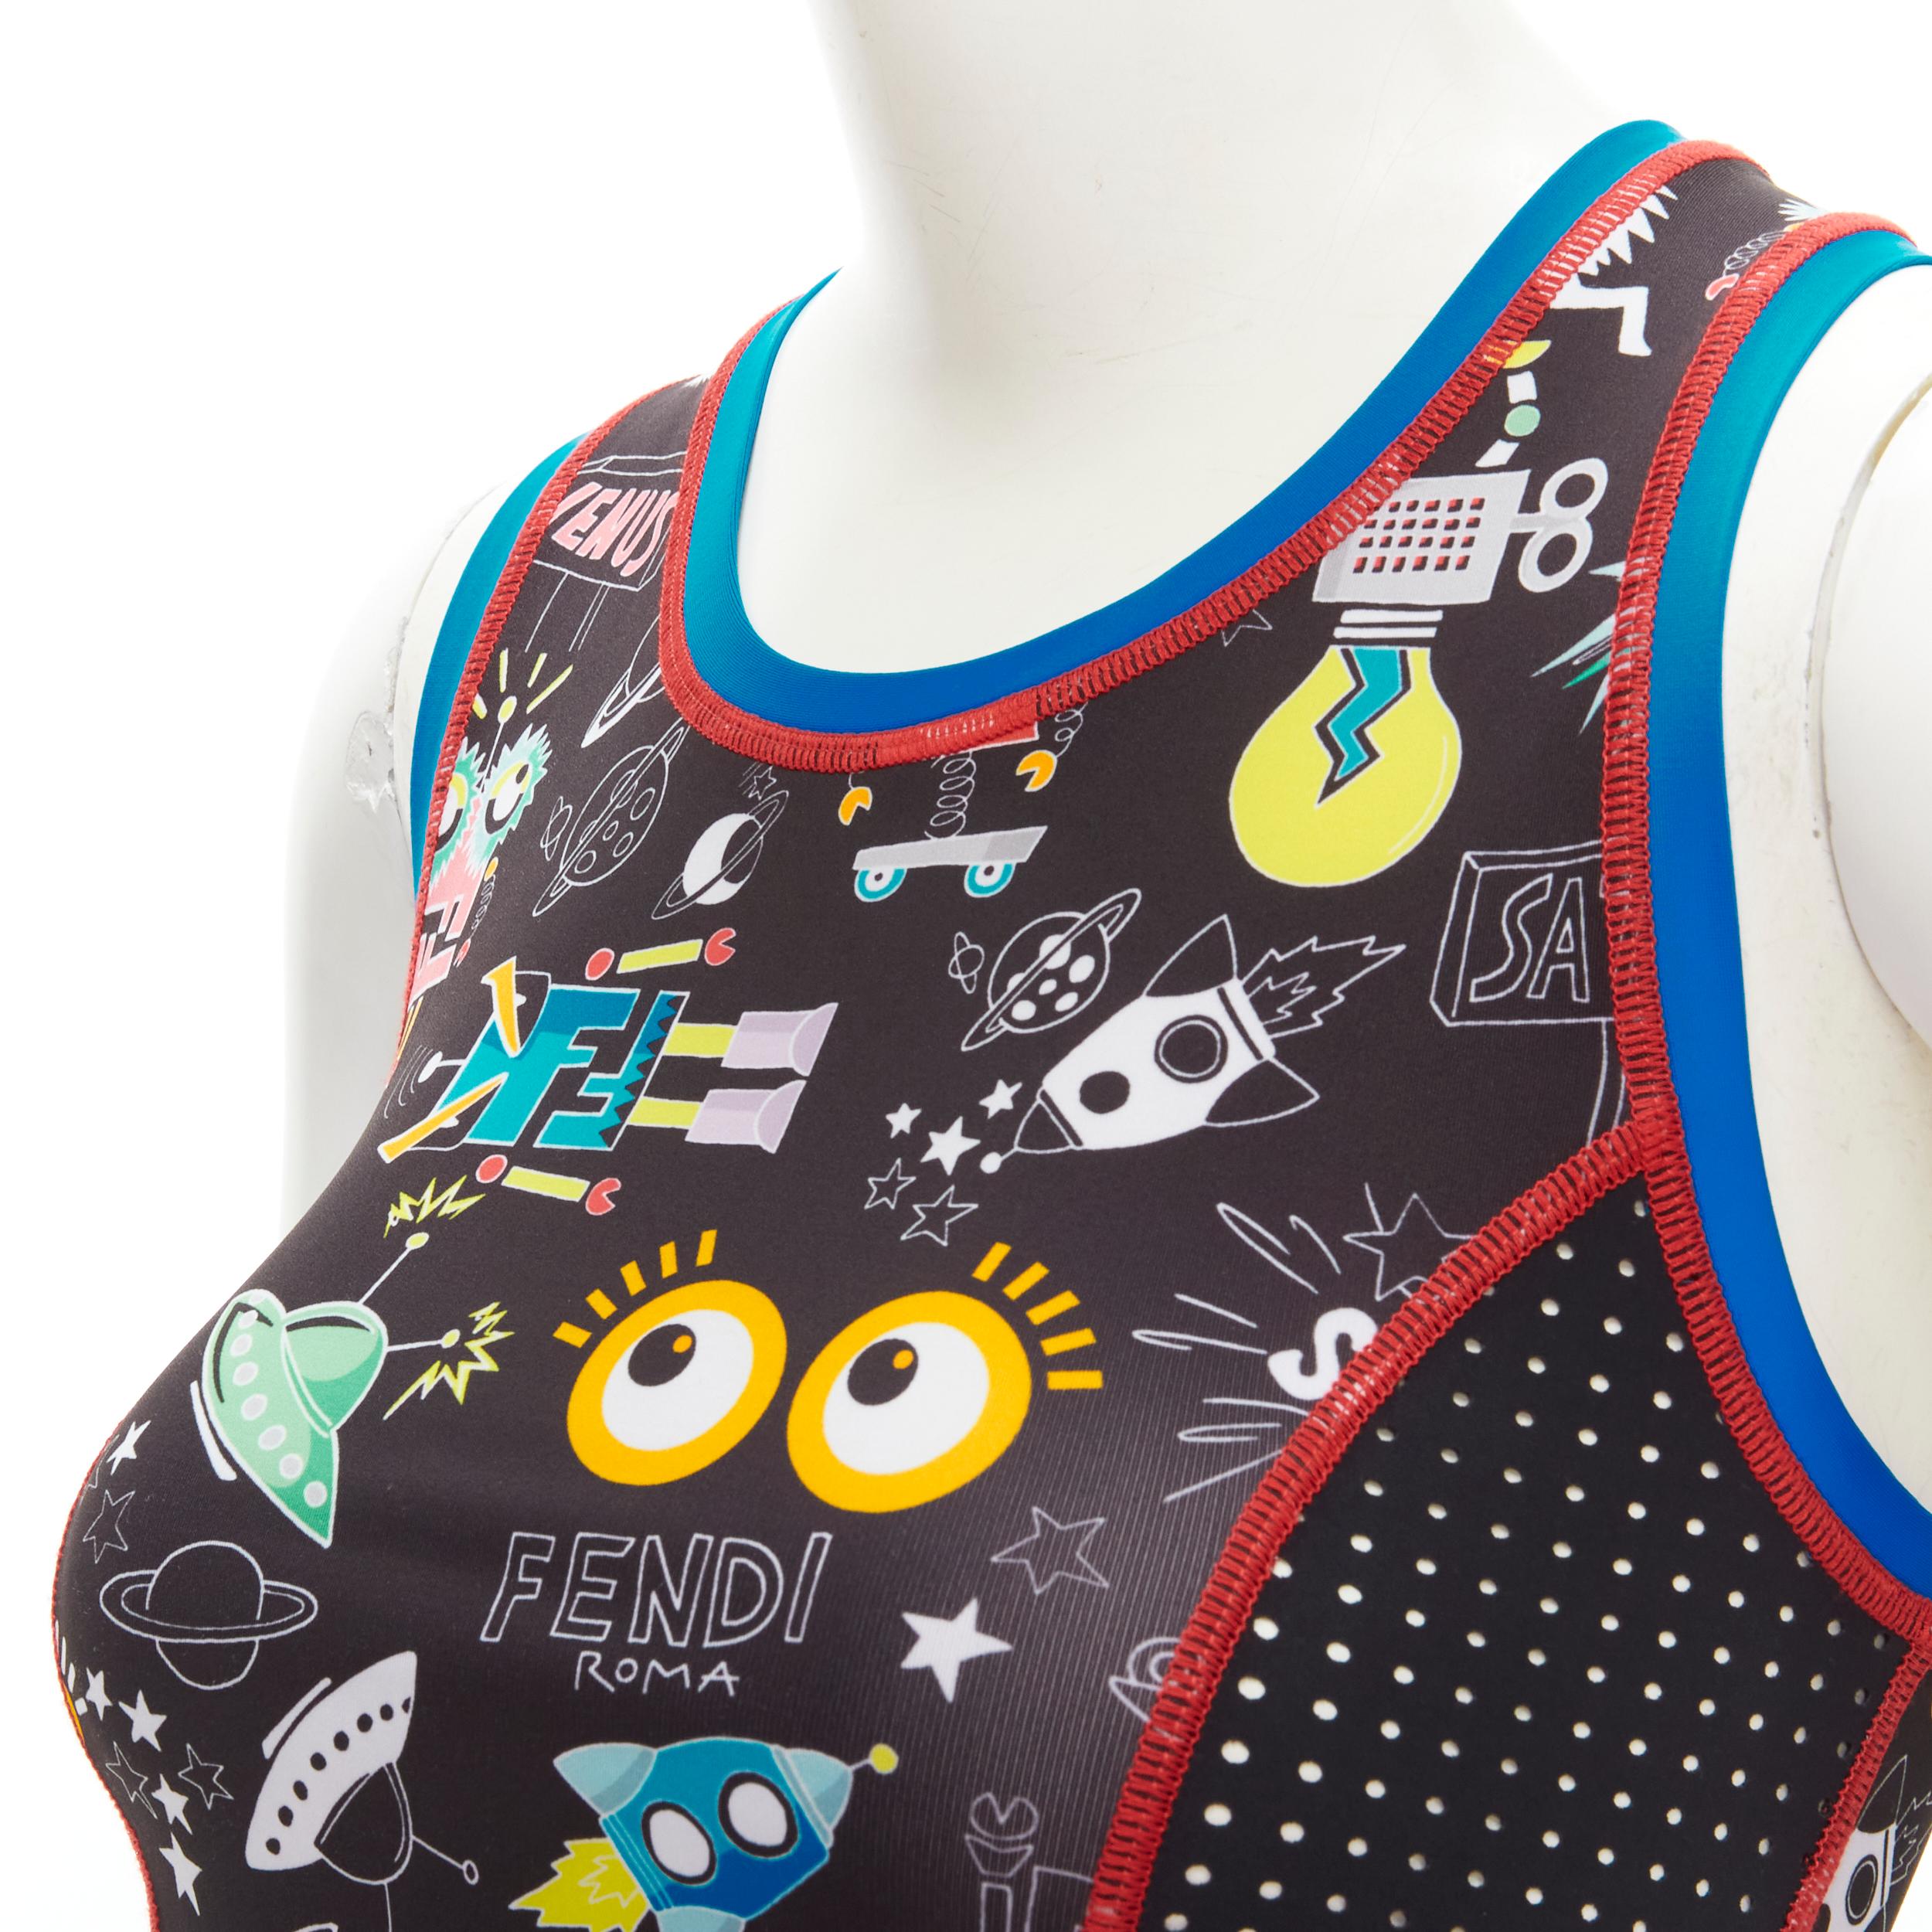 FENDI Activewear black FF robot Monster Eye tank top XS
Brand: Fendi
Material: Feels like polyester
Color: Black
Pattern: Multi
Extra Detail: Perforated side and back panels. Red overlocking stitches. Pocket on side with logo elastic